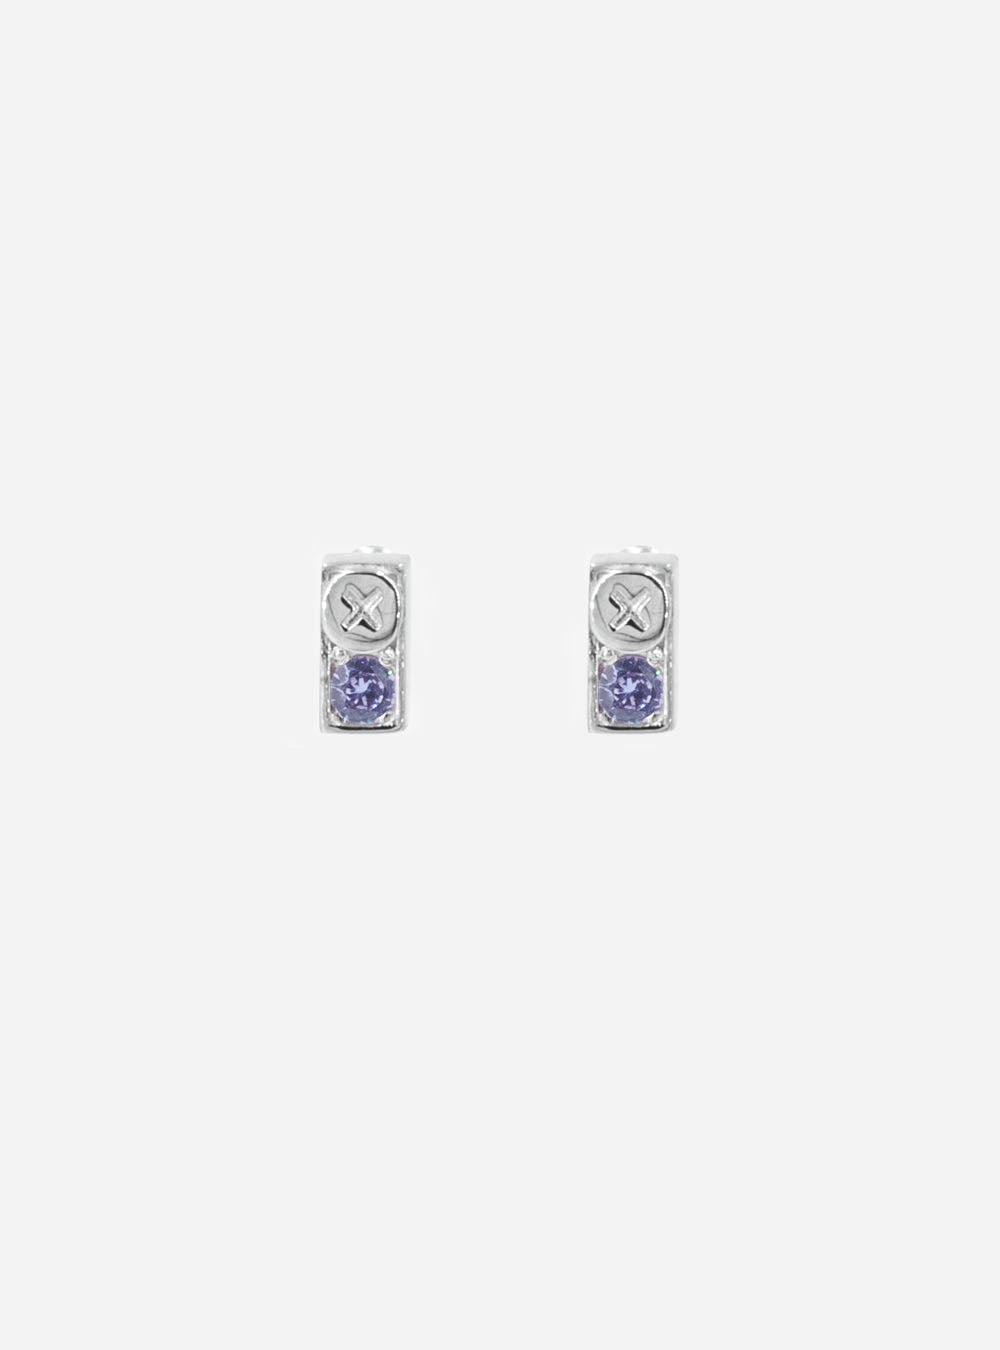 a pair of MIDNIGHTFACTORY Screwbox colour-changing earrings with tanzanite stones.